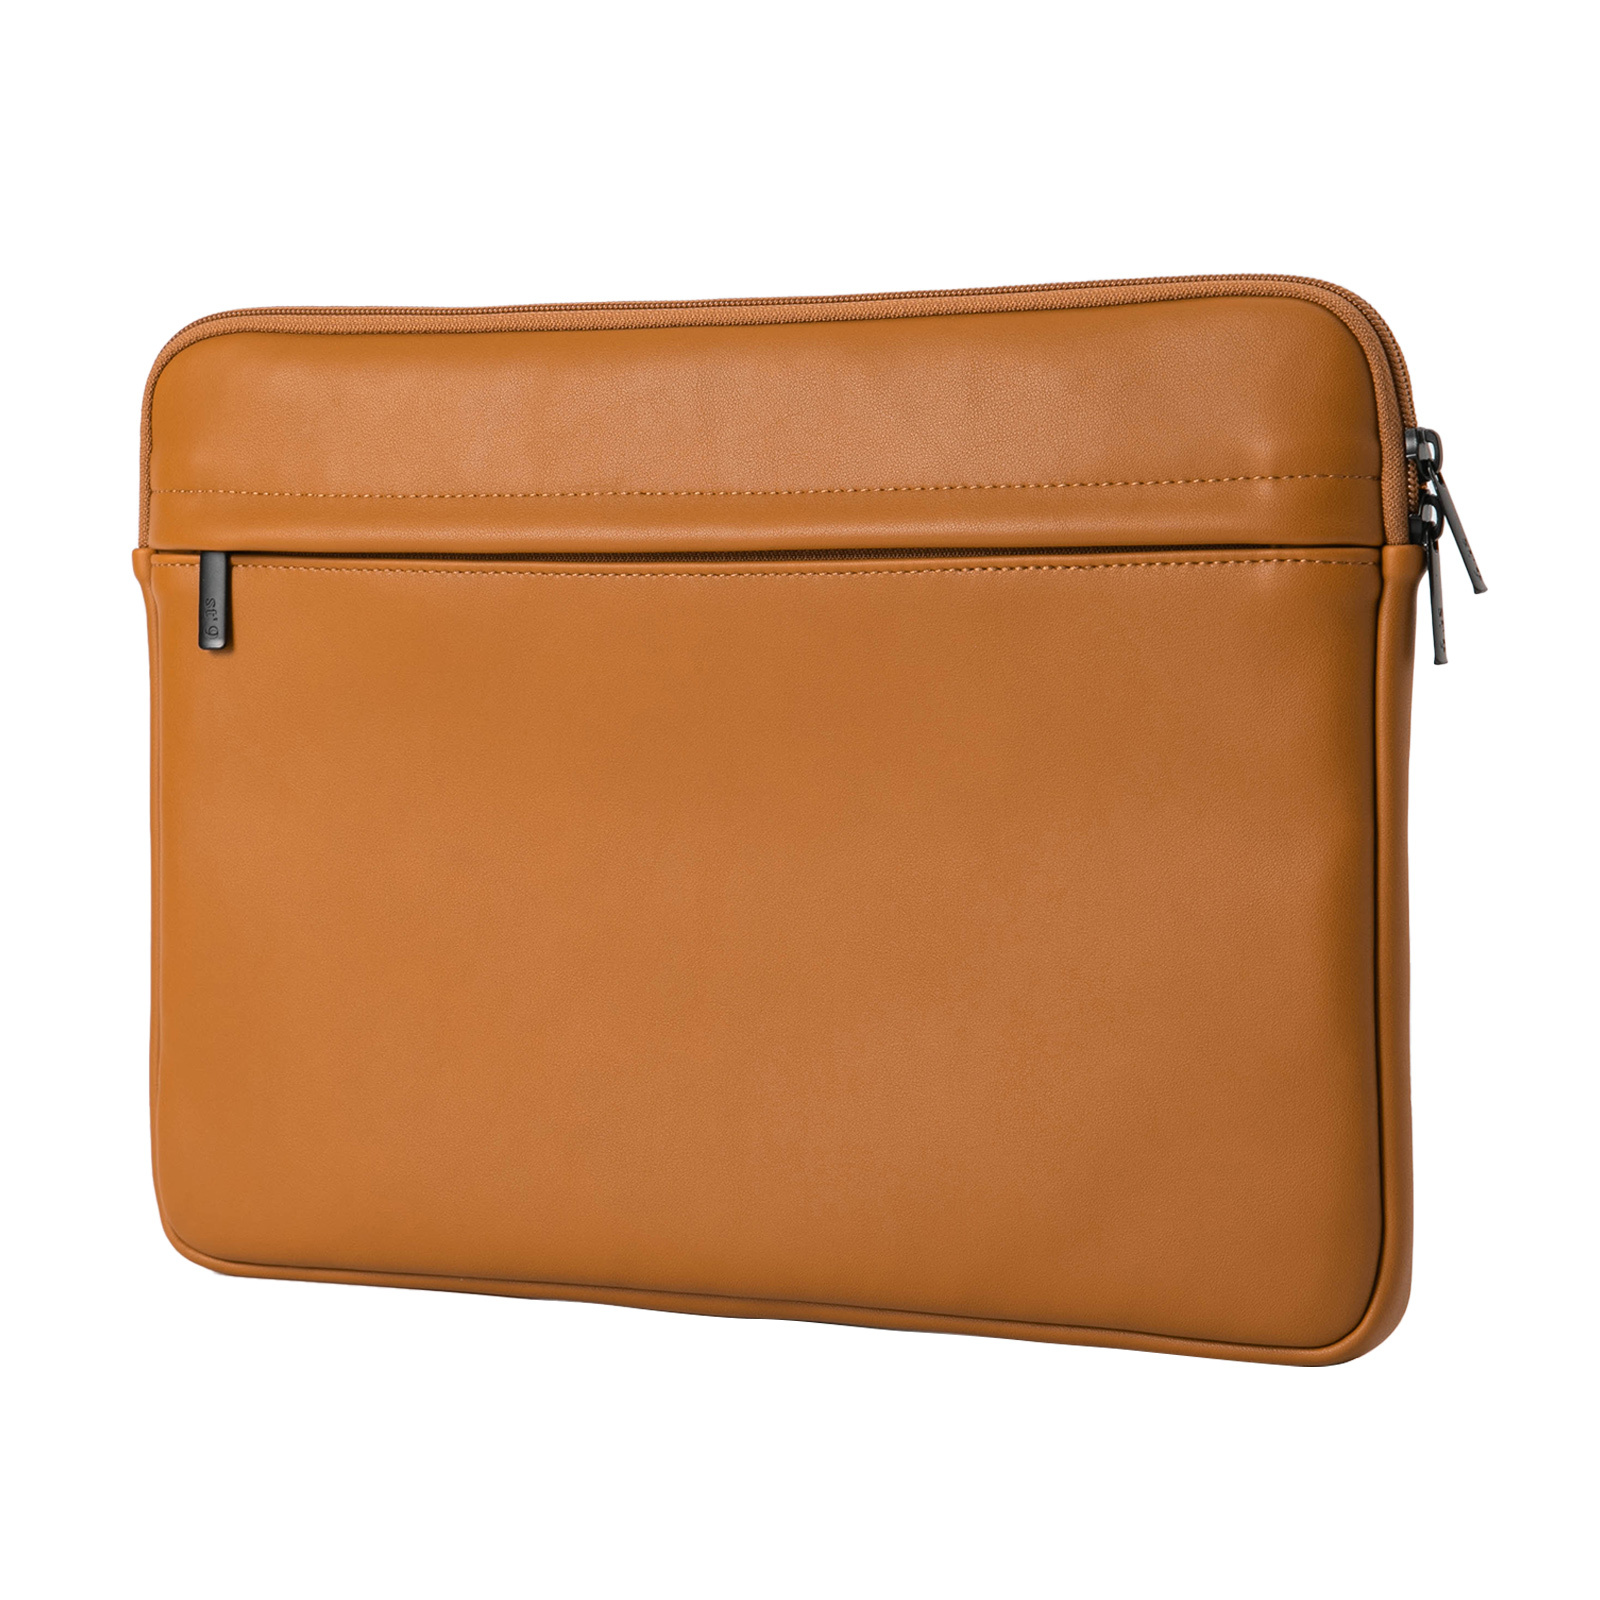 Large 15 inch Laptop Sleeve ERATO - BROWN 